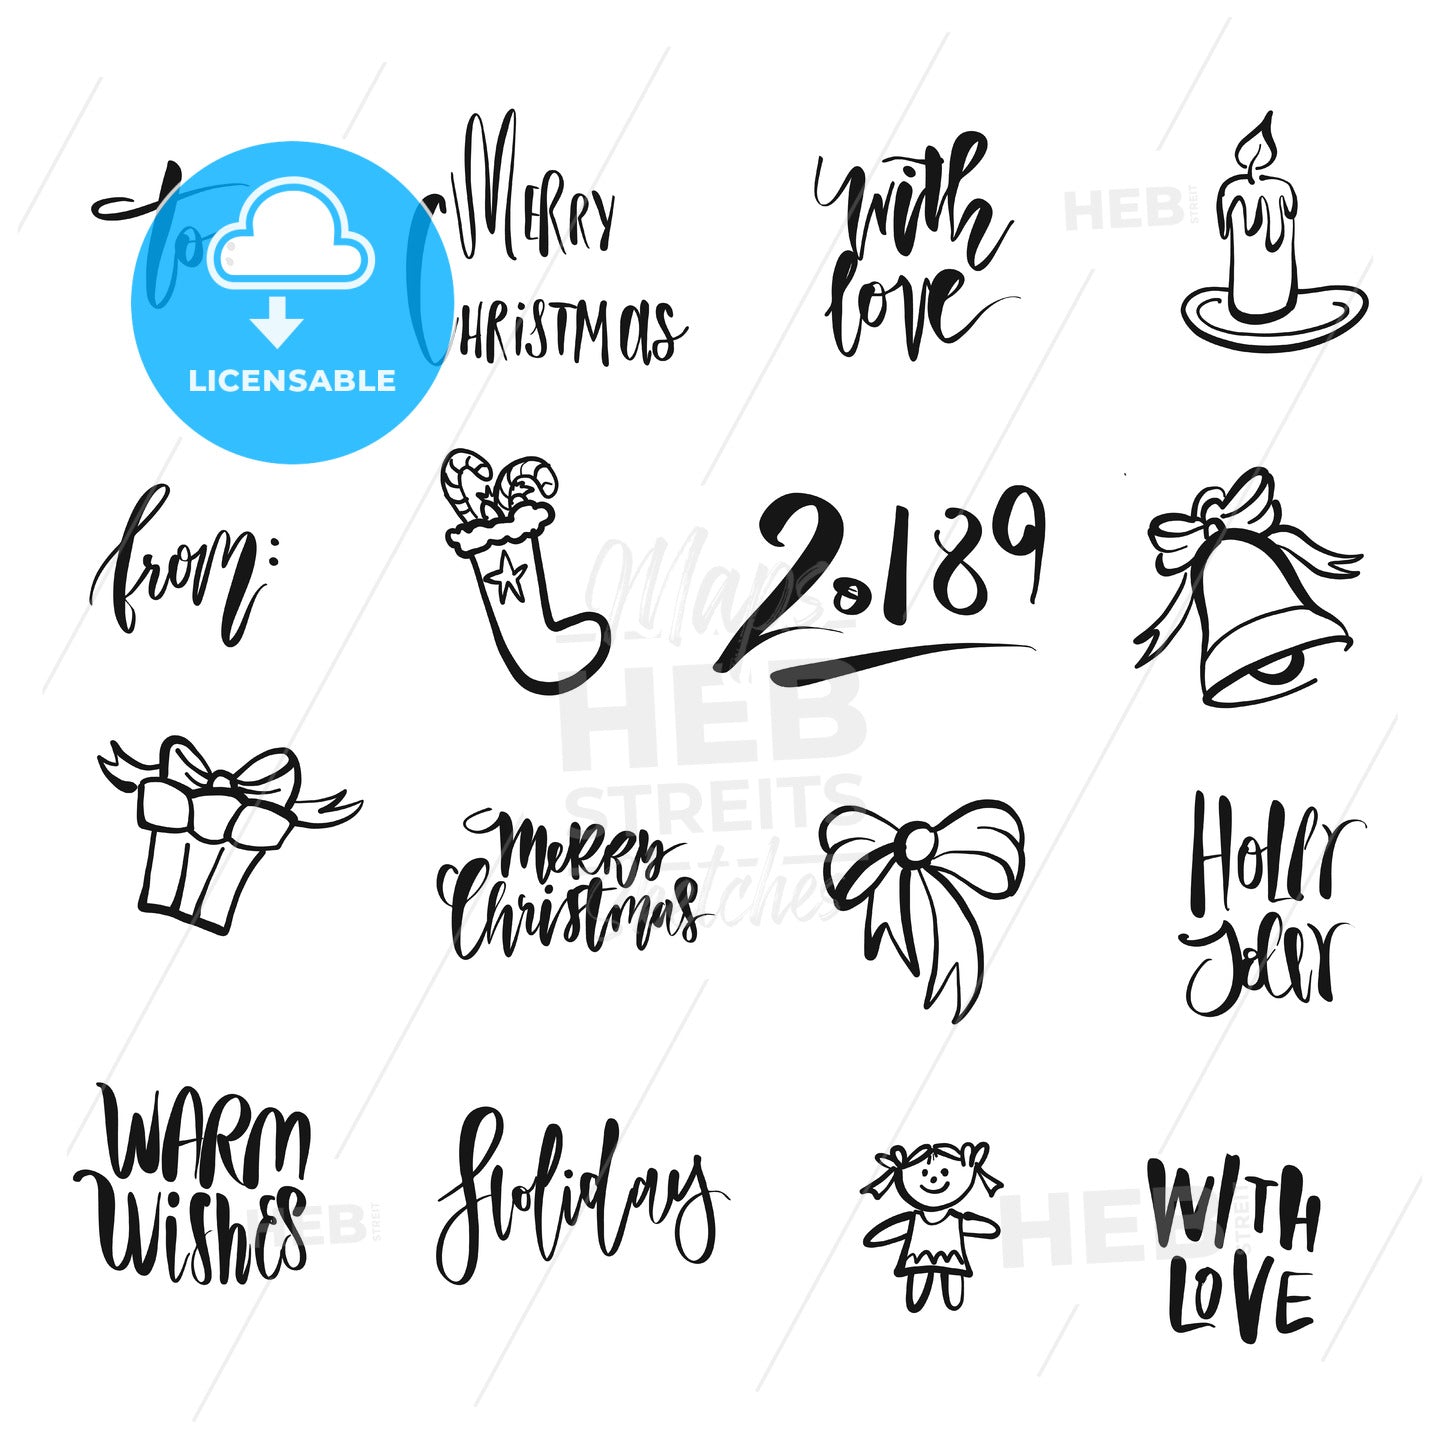 Christmas icons and words – instant download